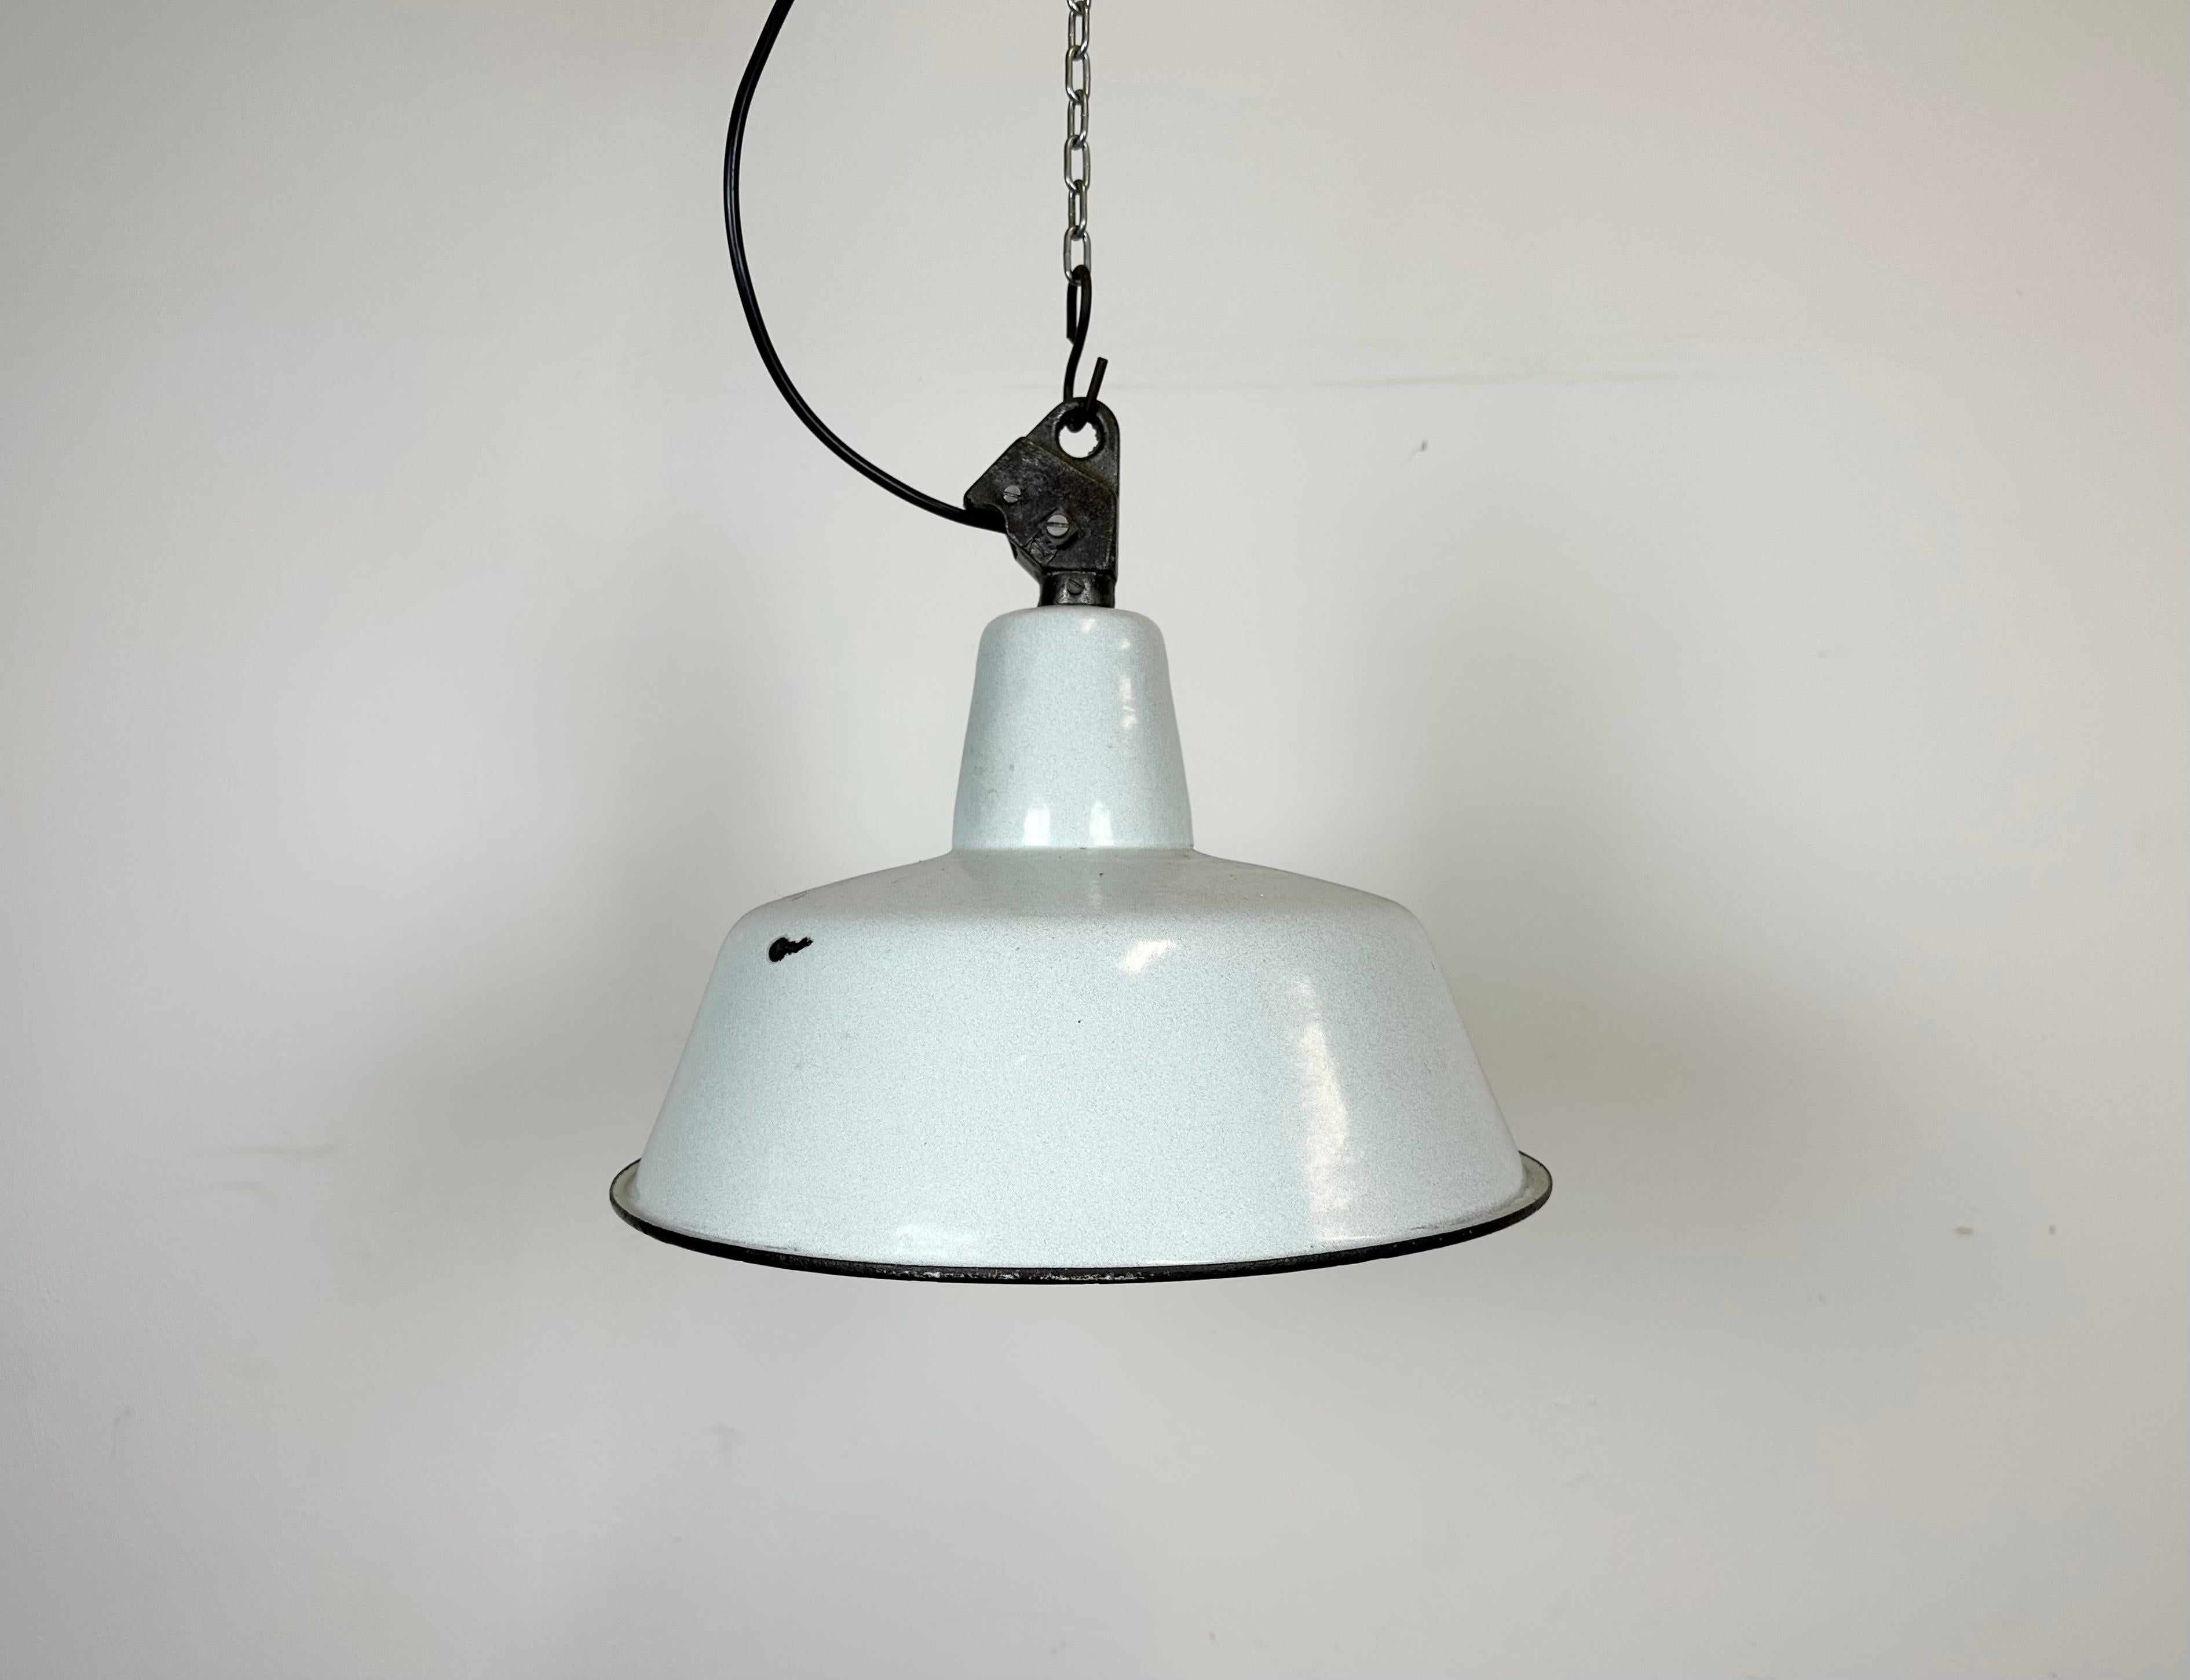 Industrial white (light grey) enamel pendant light made by Polam Wilkasy in Poland during the 1960s. White enamel inside the shade. Cast iron top. The porcelain socket requires E 27/ E 26 light bulbs. New wire. Fully functional. The weight of the